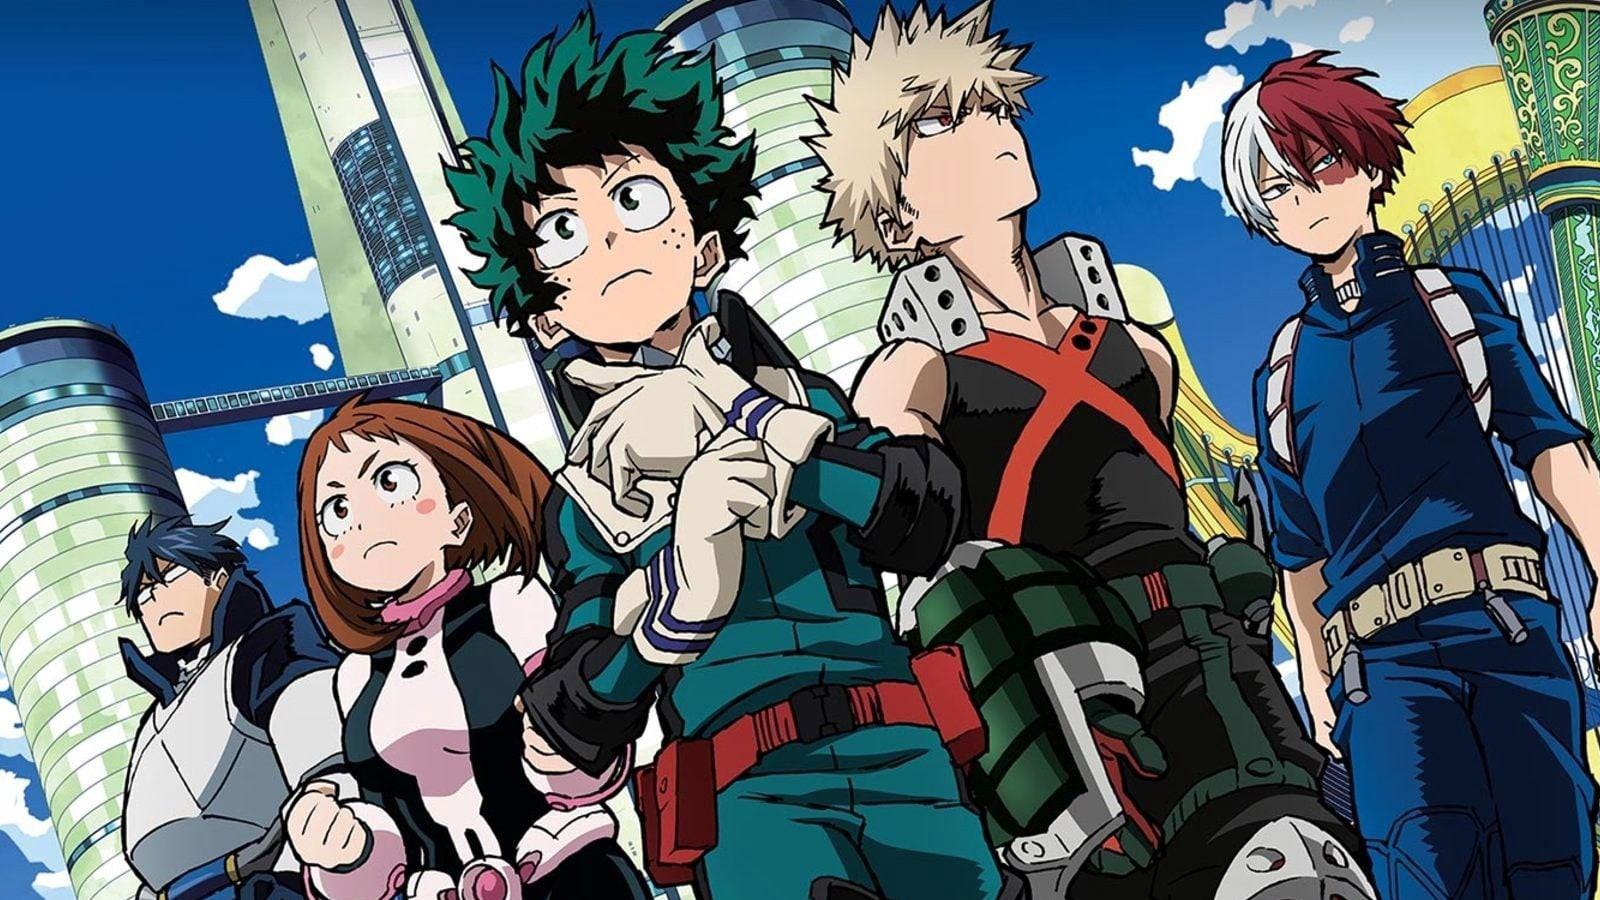 HOW TO WATCH Boku no Hero Academia? Dubbed and subtitled? NETFLIX